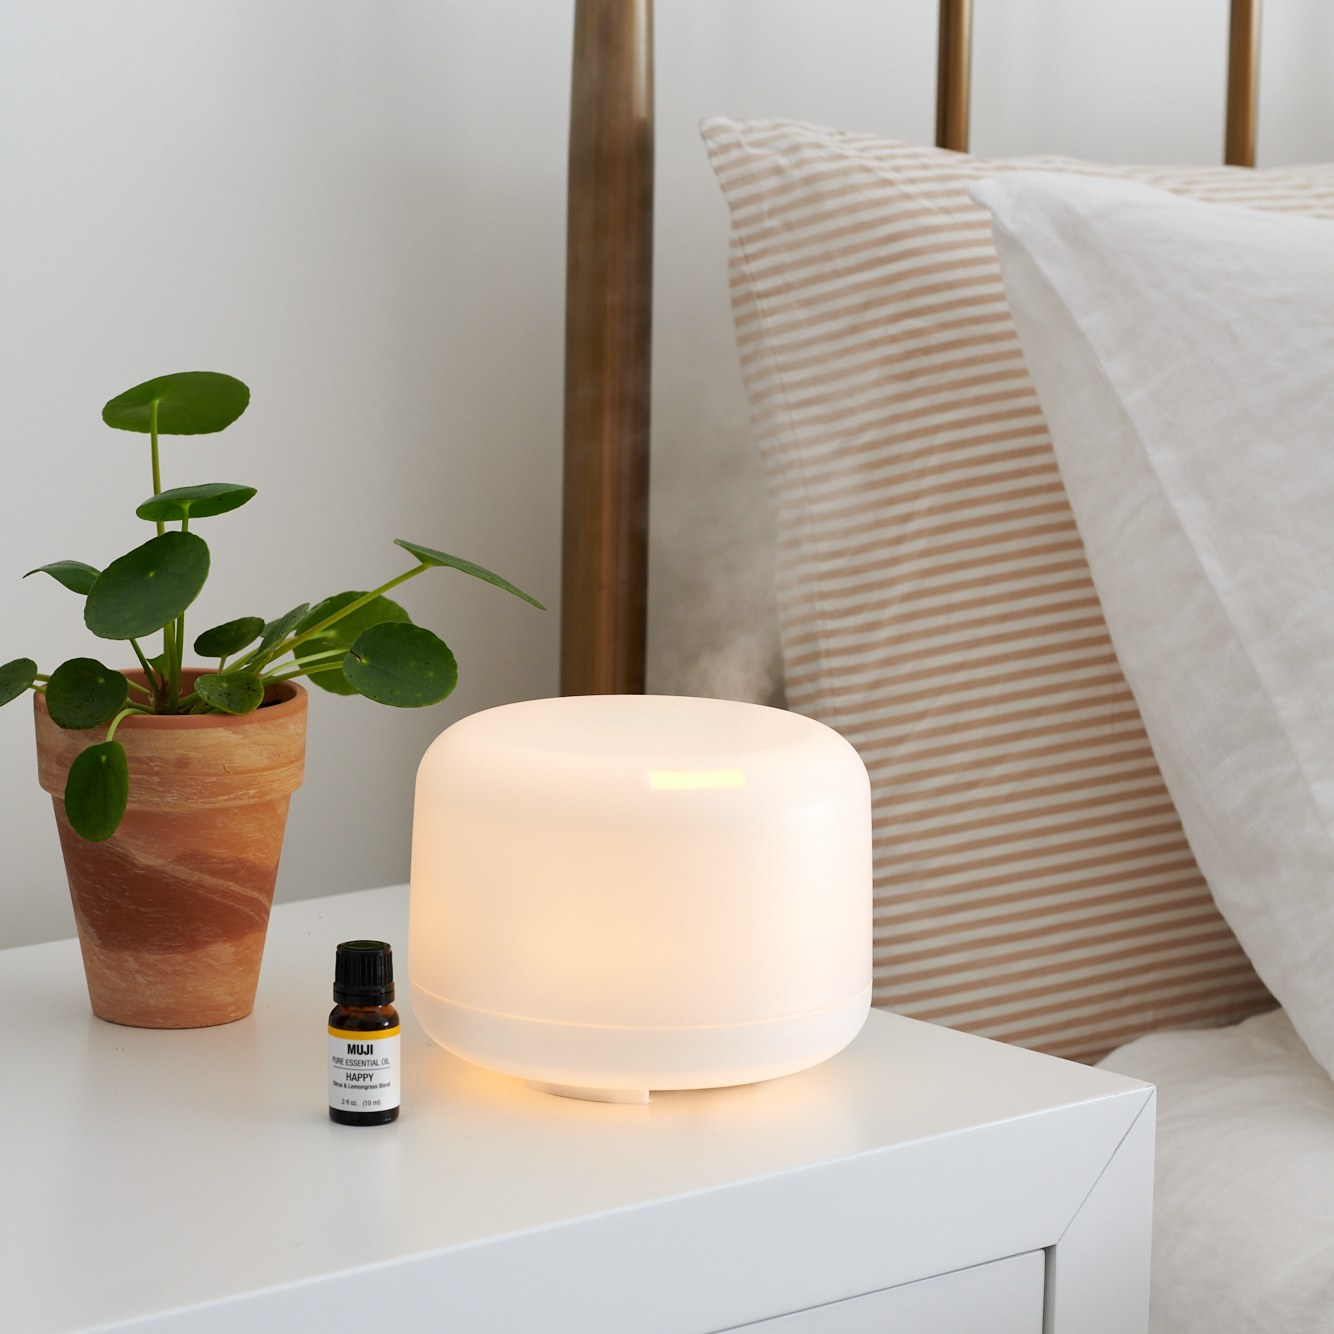 Air bnb and muji bedside lightup humidifier  by Alison Gootee Photography